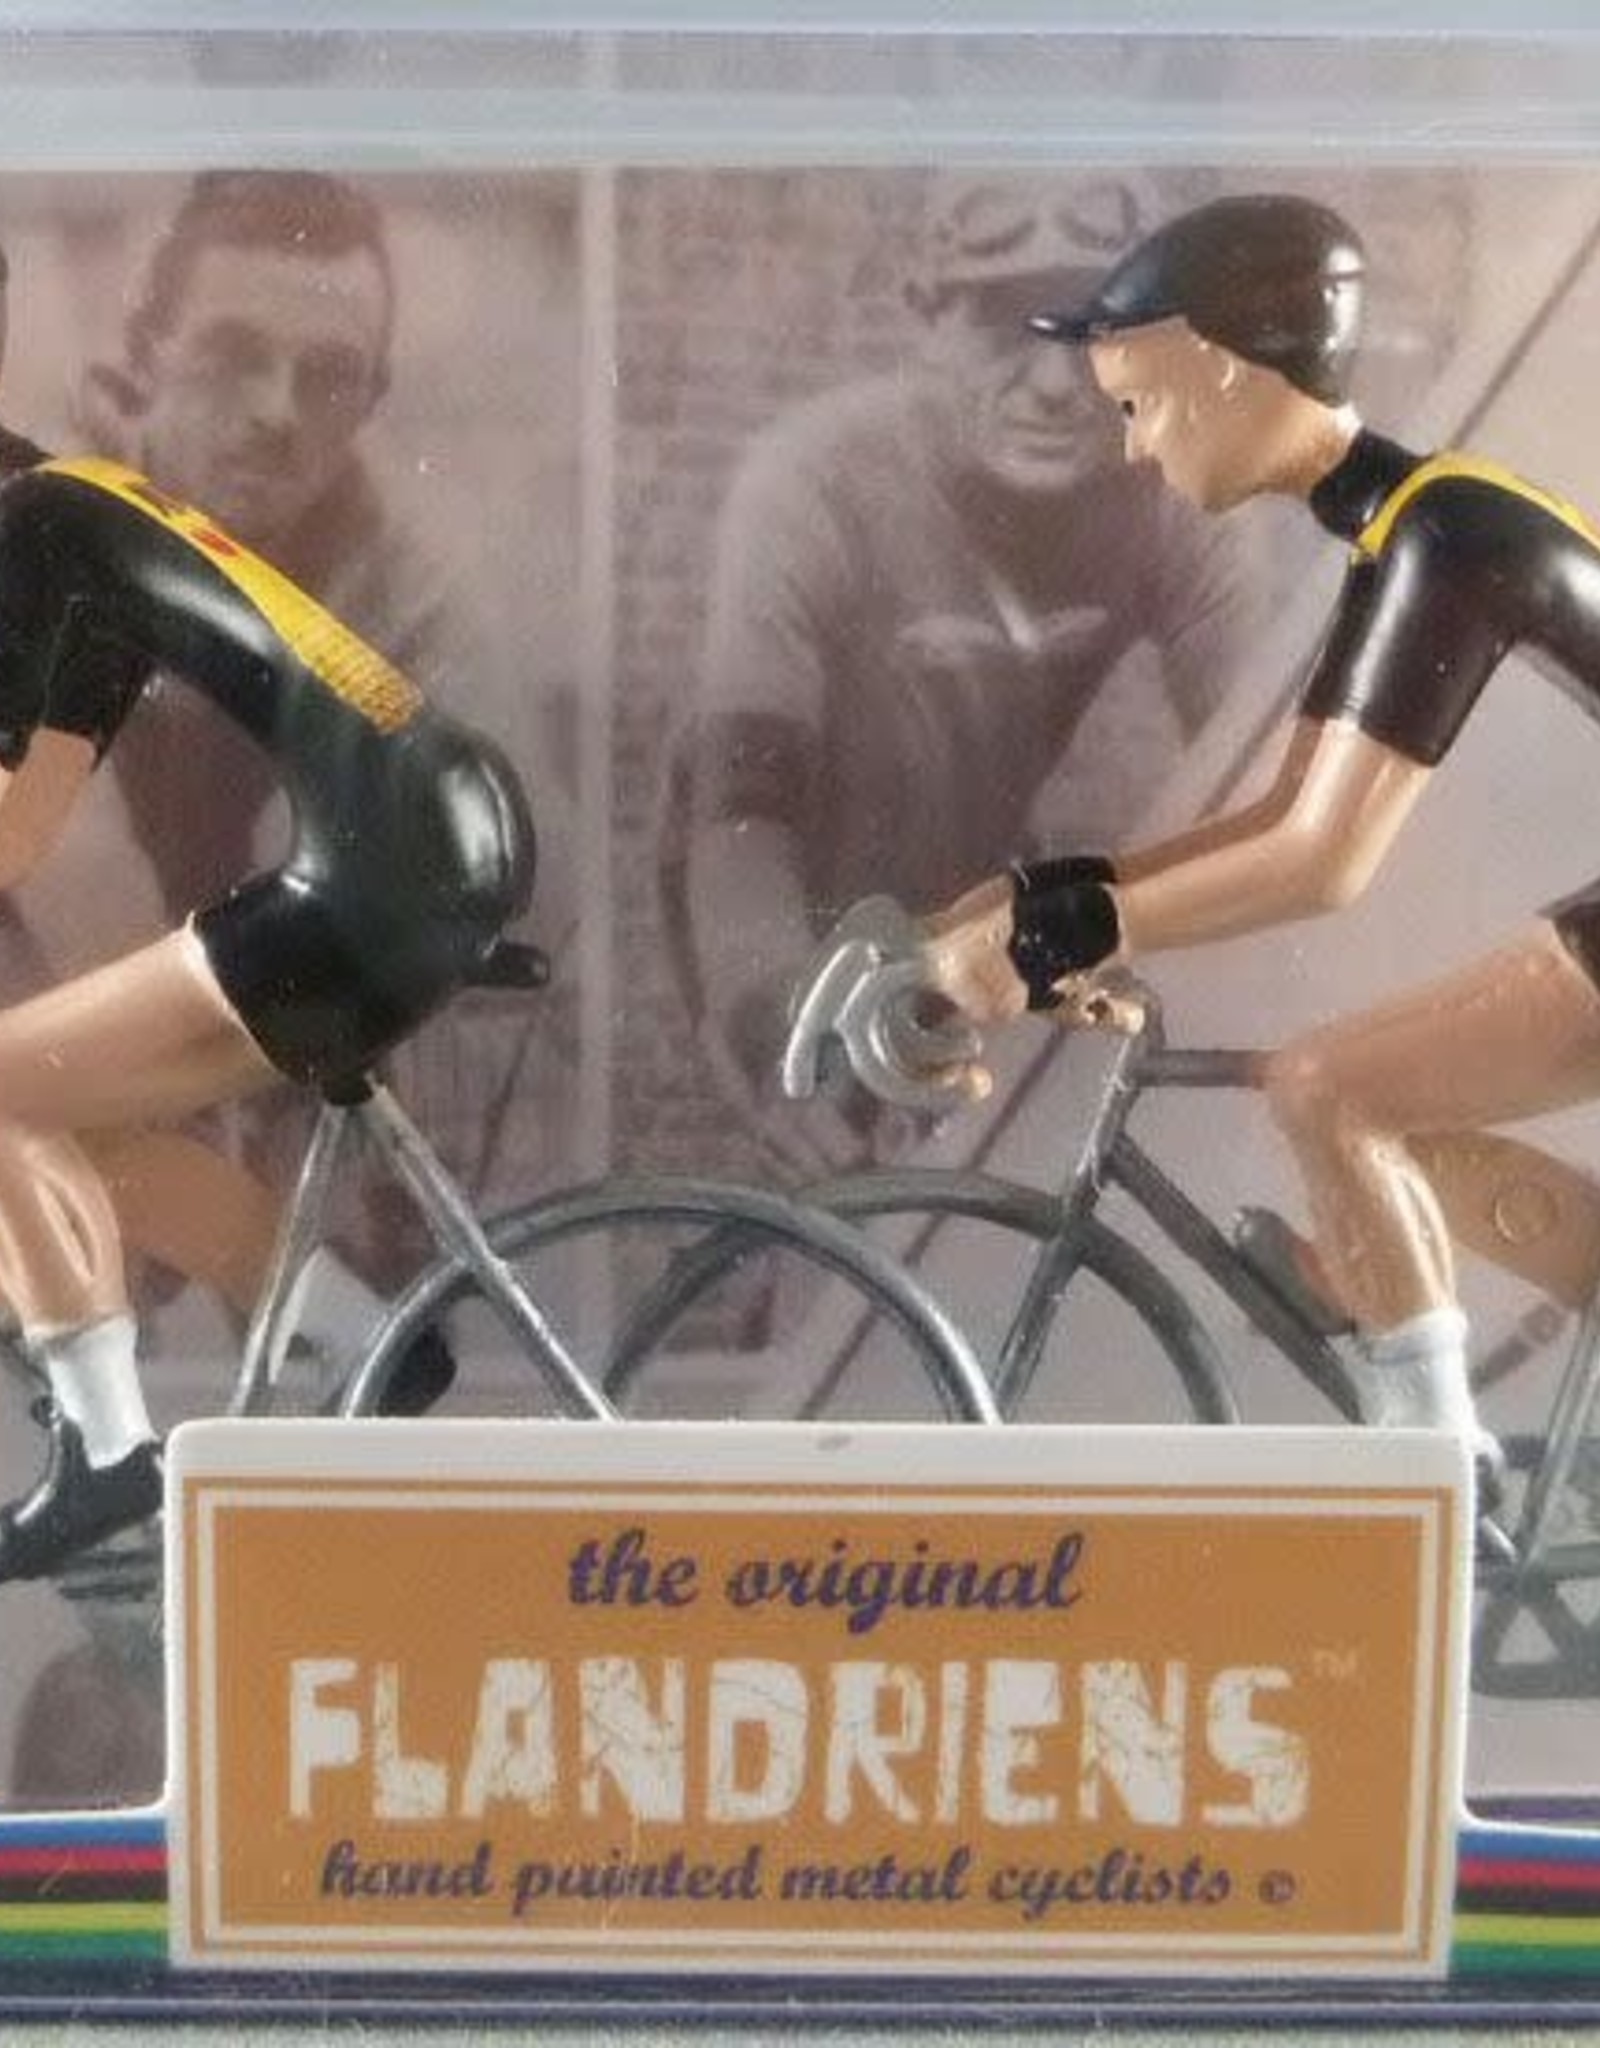 Flandriens Hand Painted Metal Cyclists